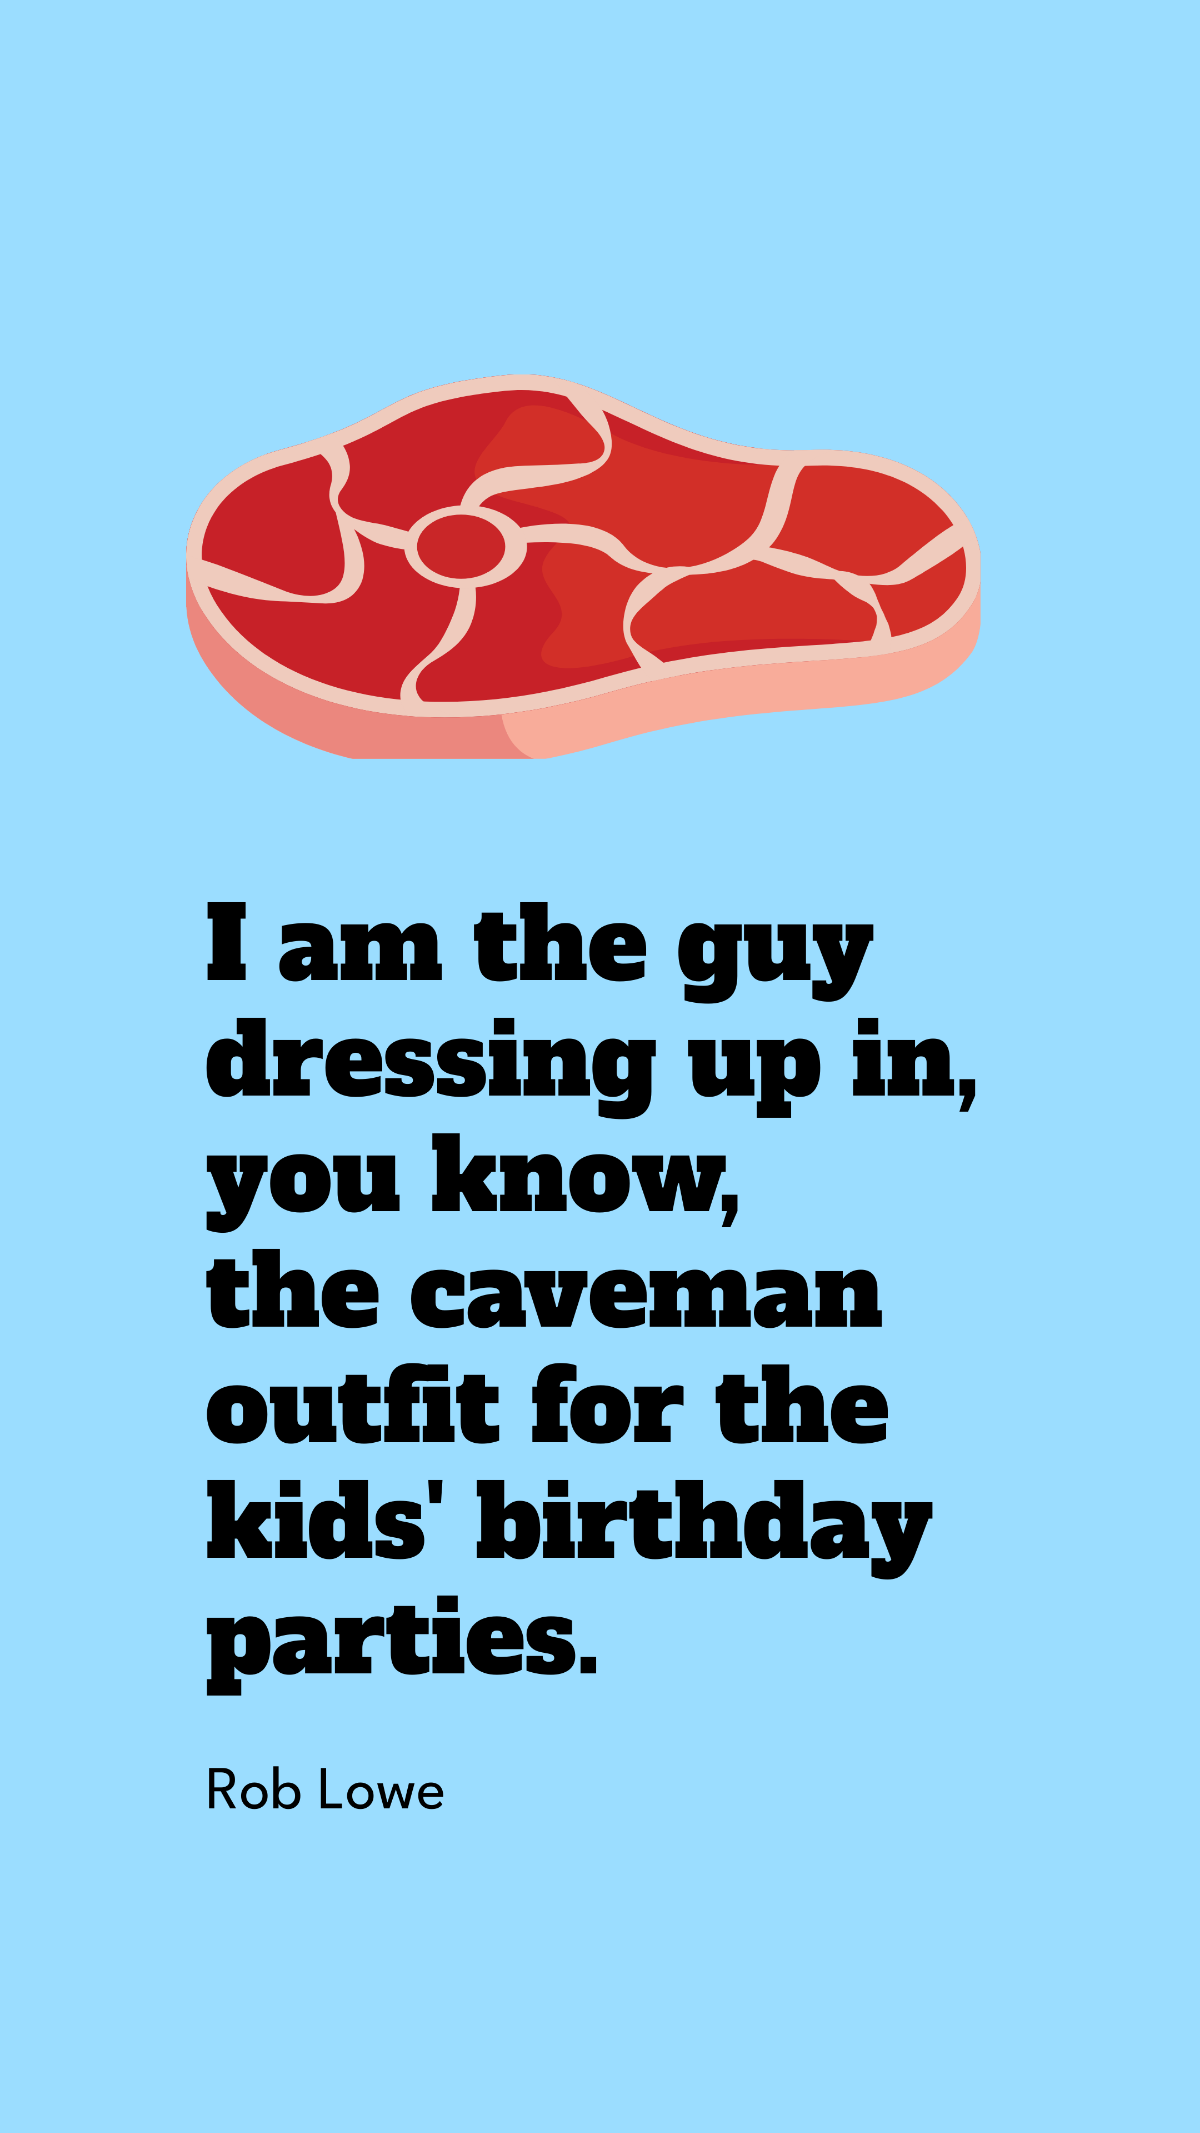 Rob Lowe - I am the guy dressing up in, you know, the caveman outfit for the kids' birthday parties.